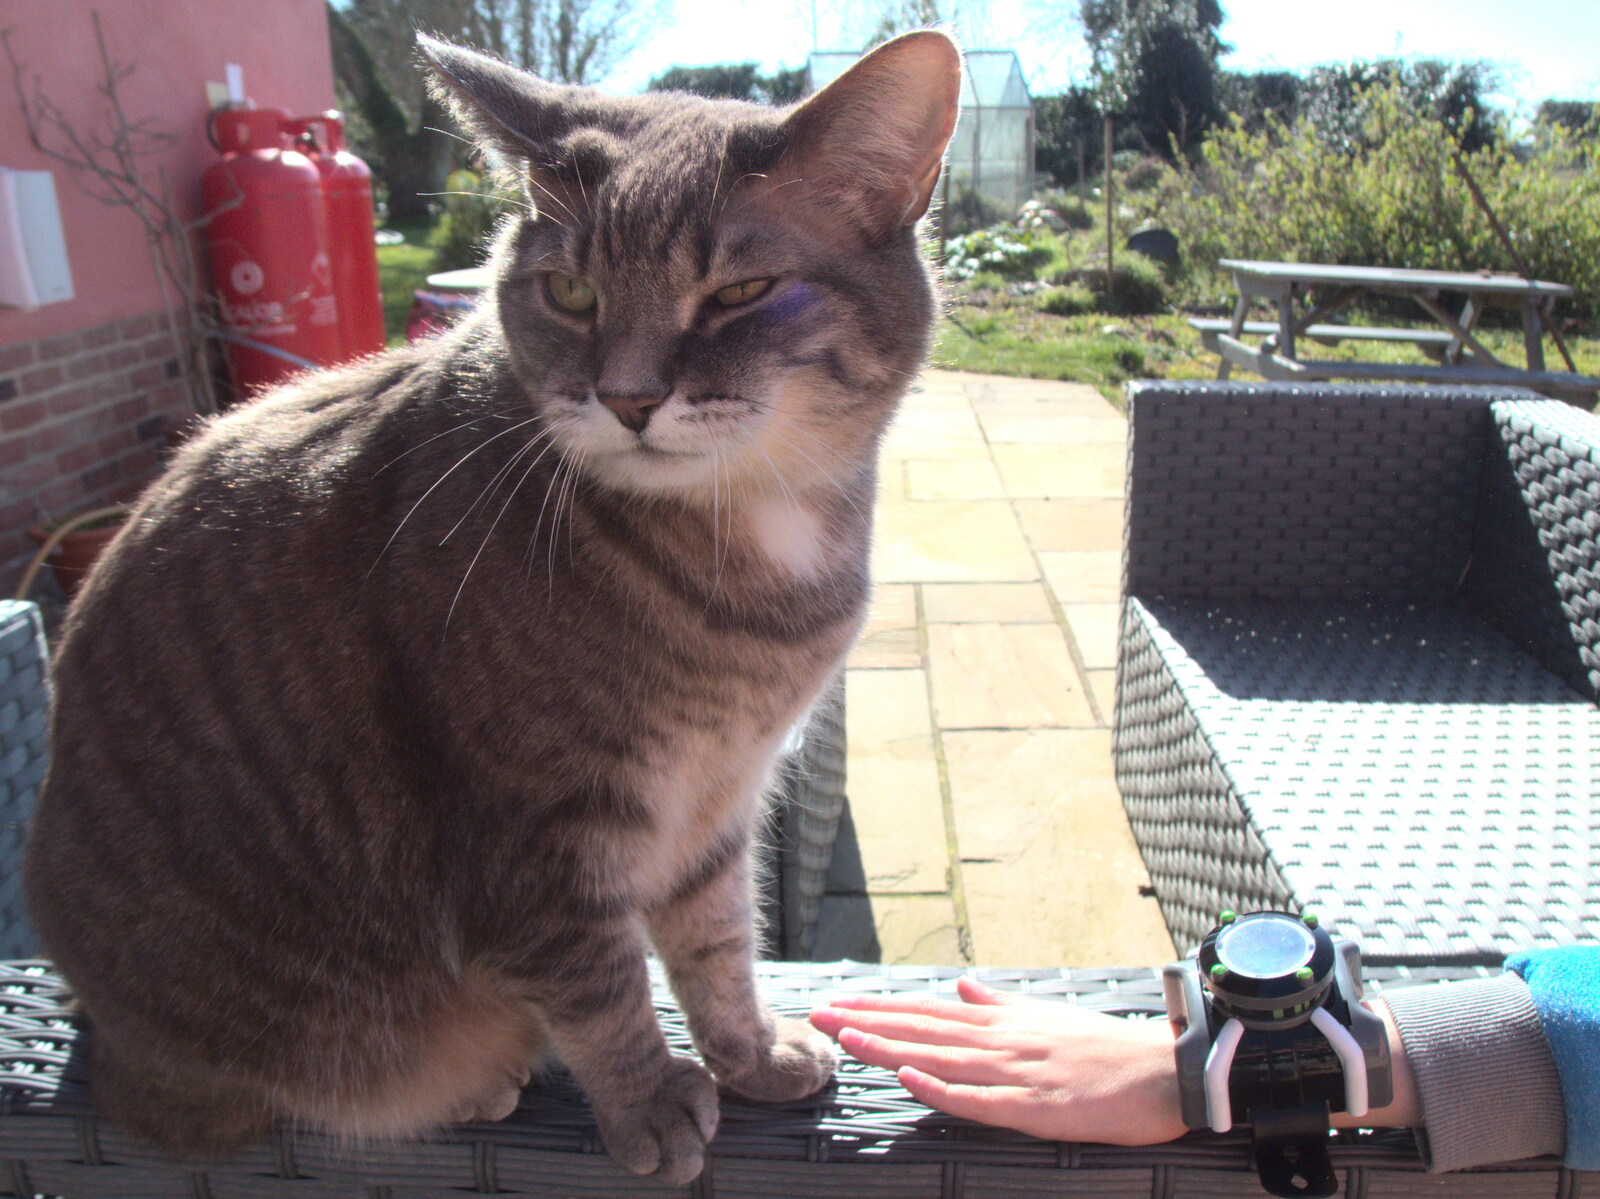 Harry reaches out to Boris the Stripey Cat from An April Lockdown Miscellany, Eye, Suffolk - 10th April 2020